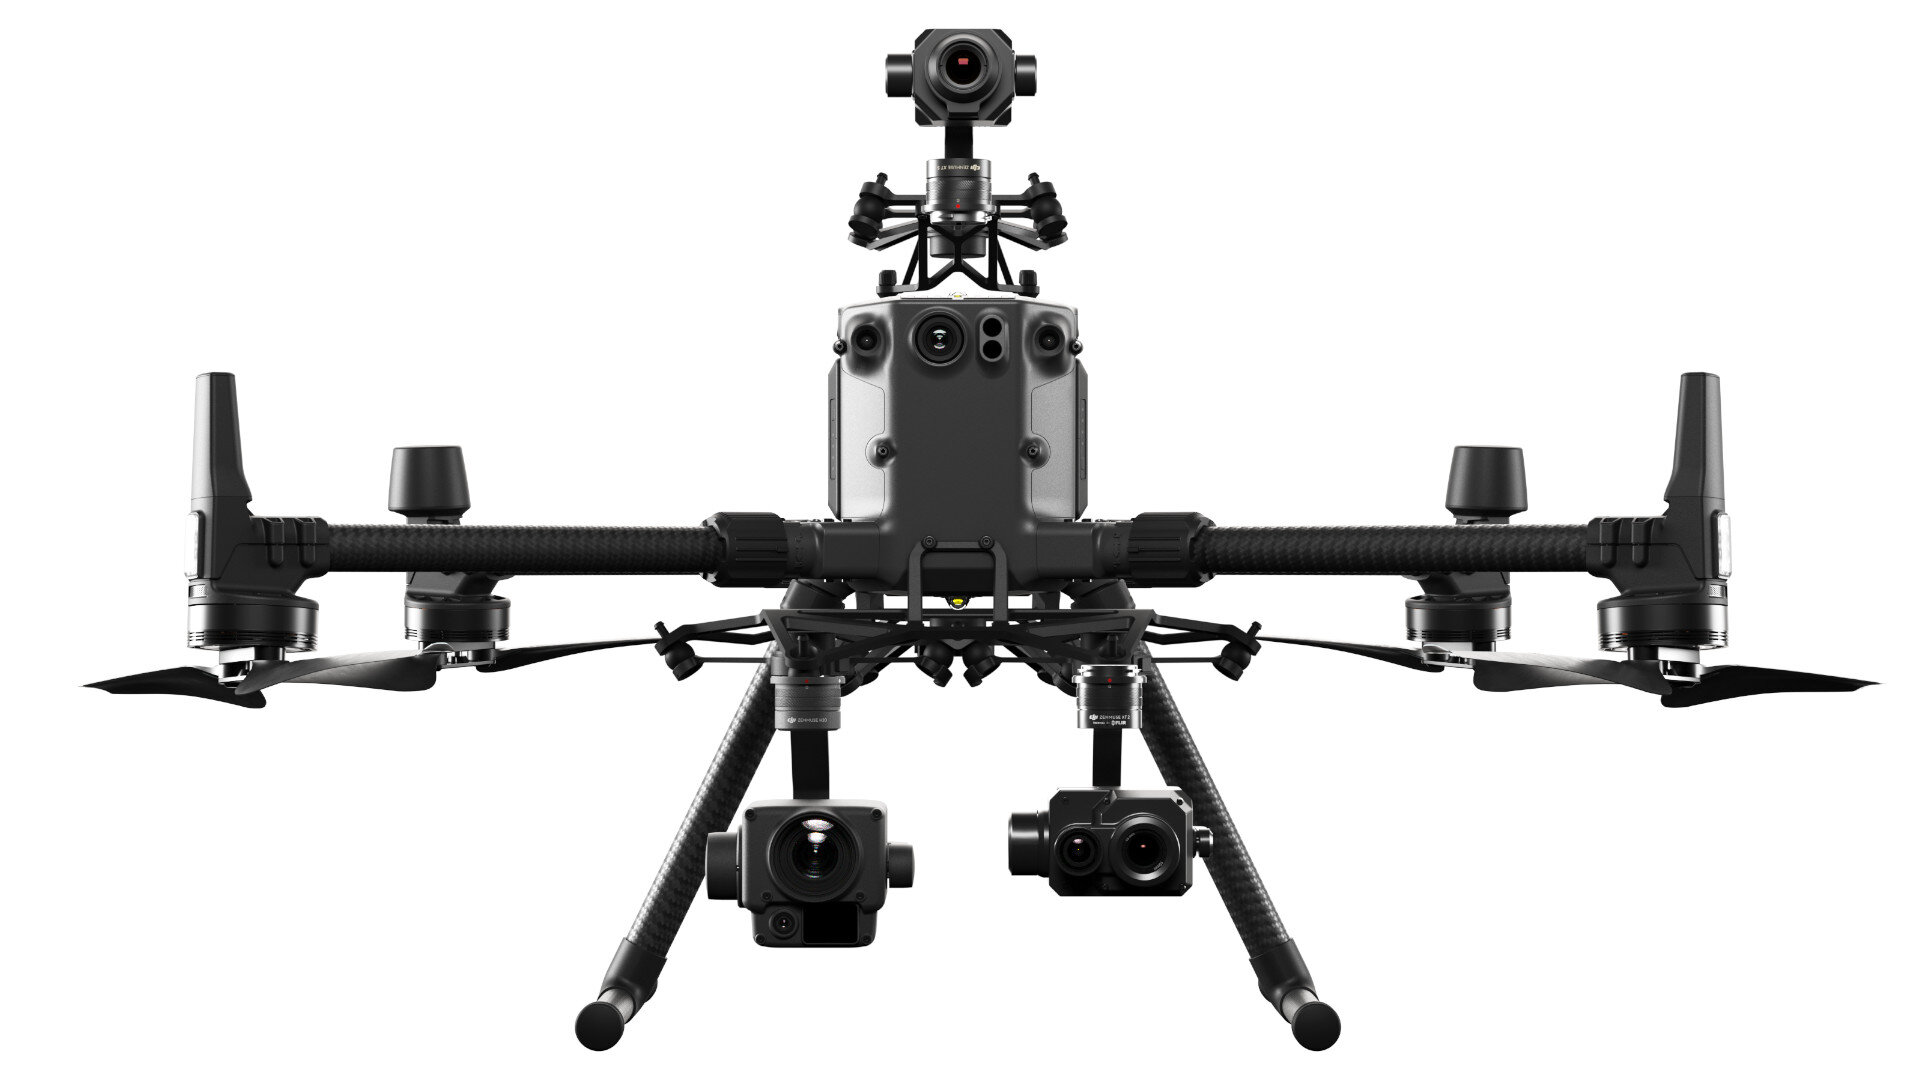 DJI-Matrice-300-RTK-commercial-drone-front-triple-payload.jpg